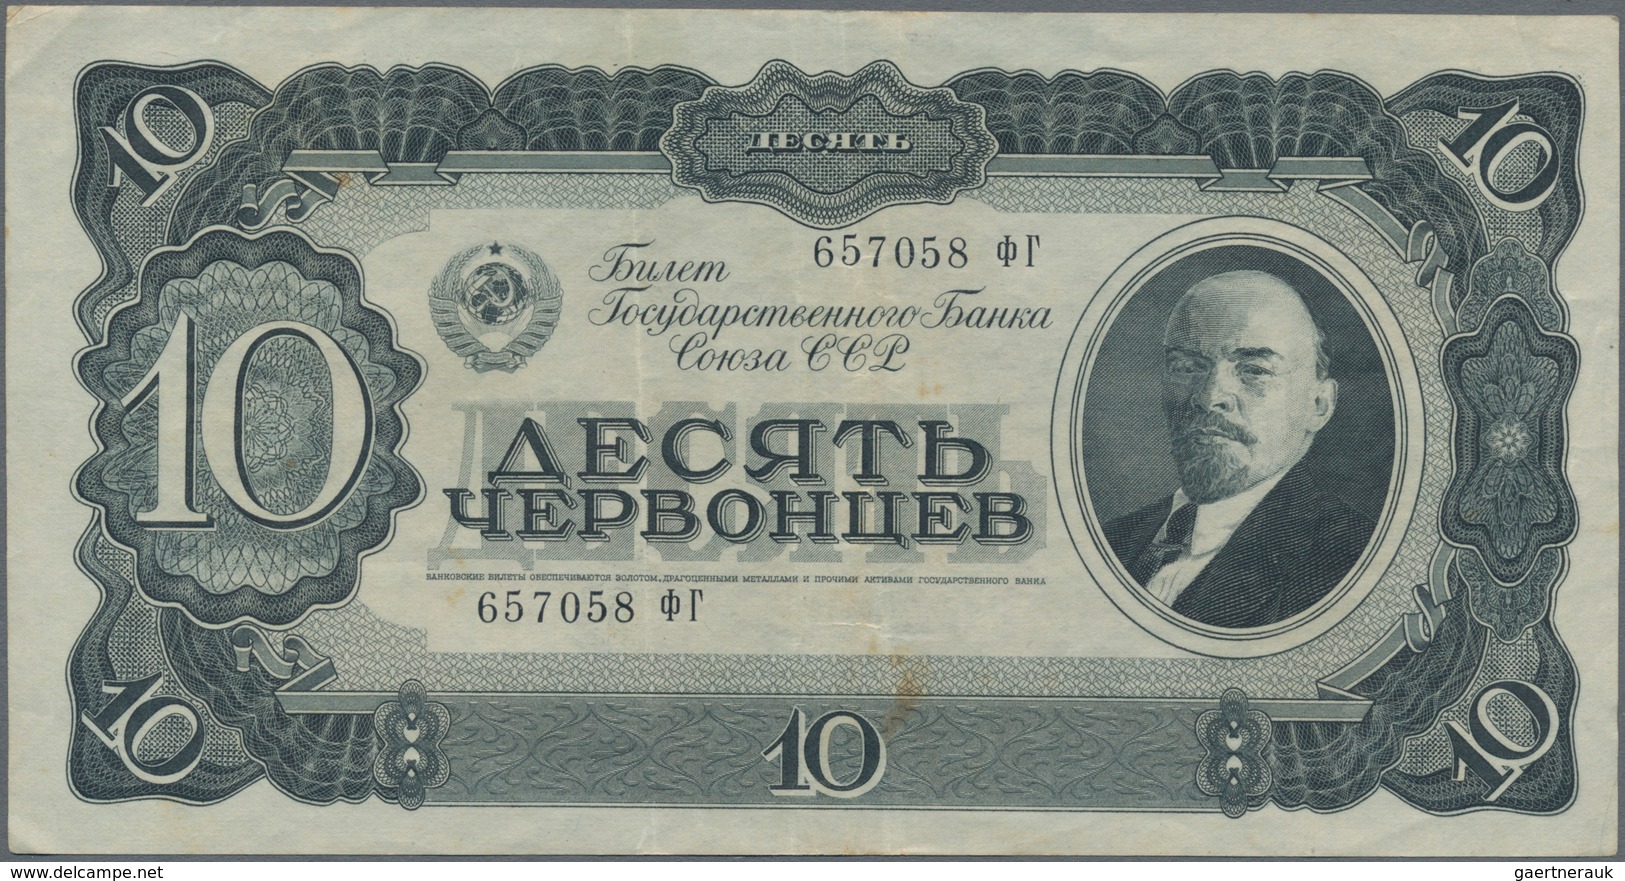 Russia / Russland: Set with 5 banknotes 1, 3, 5 and 10 Chervontsev 1937, P.202 – 205, all in about V